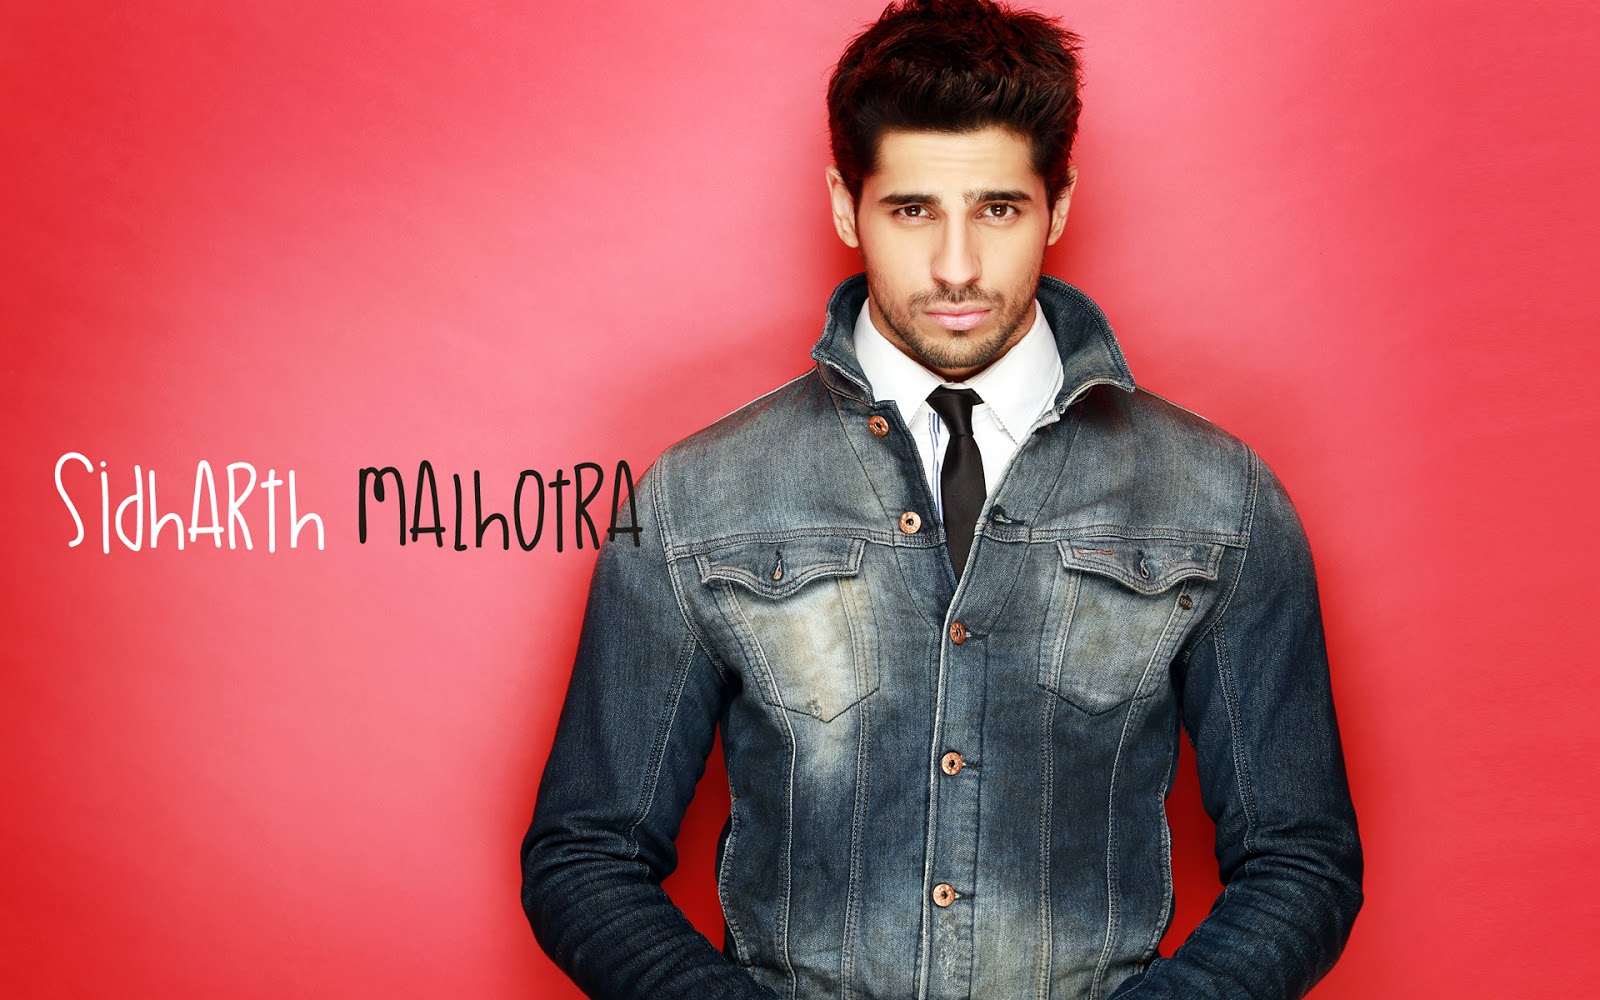 siddharth wallpaper,denim,jeans,clothing,jacket,red